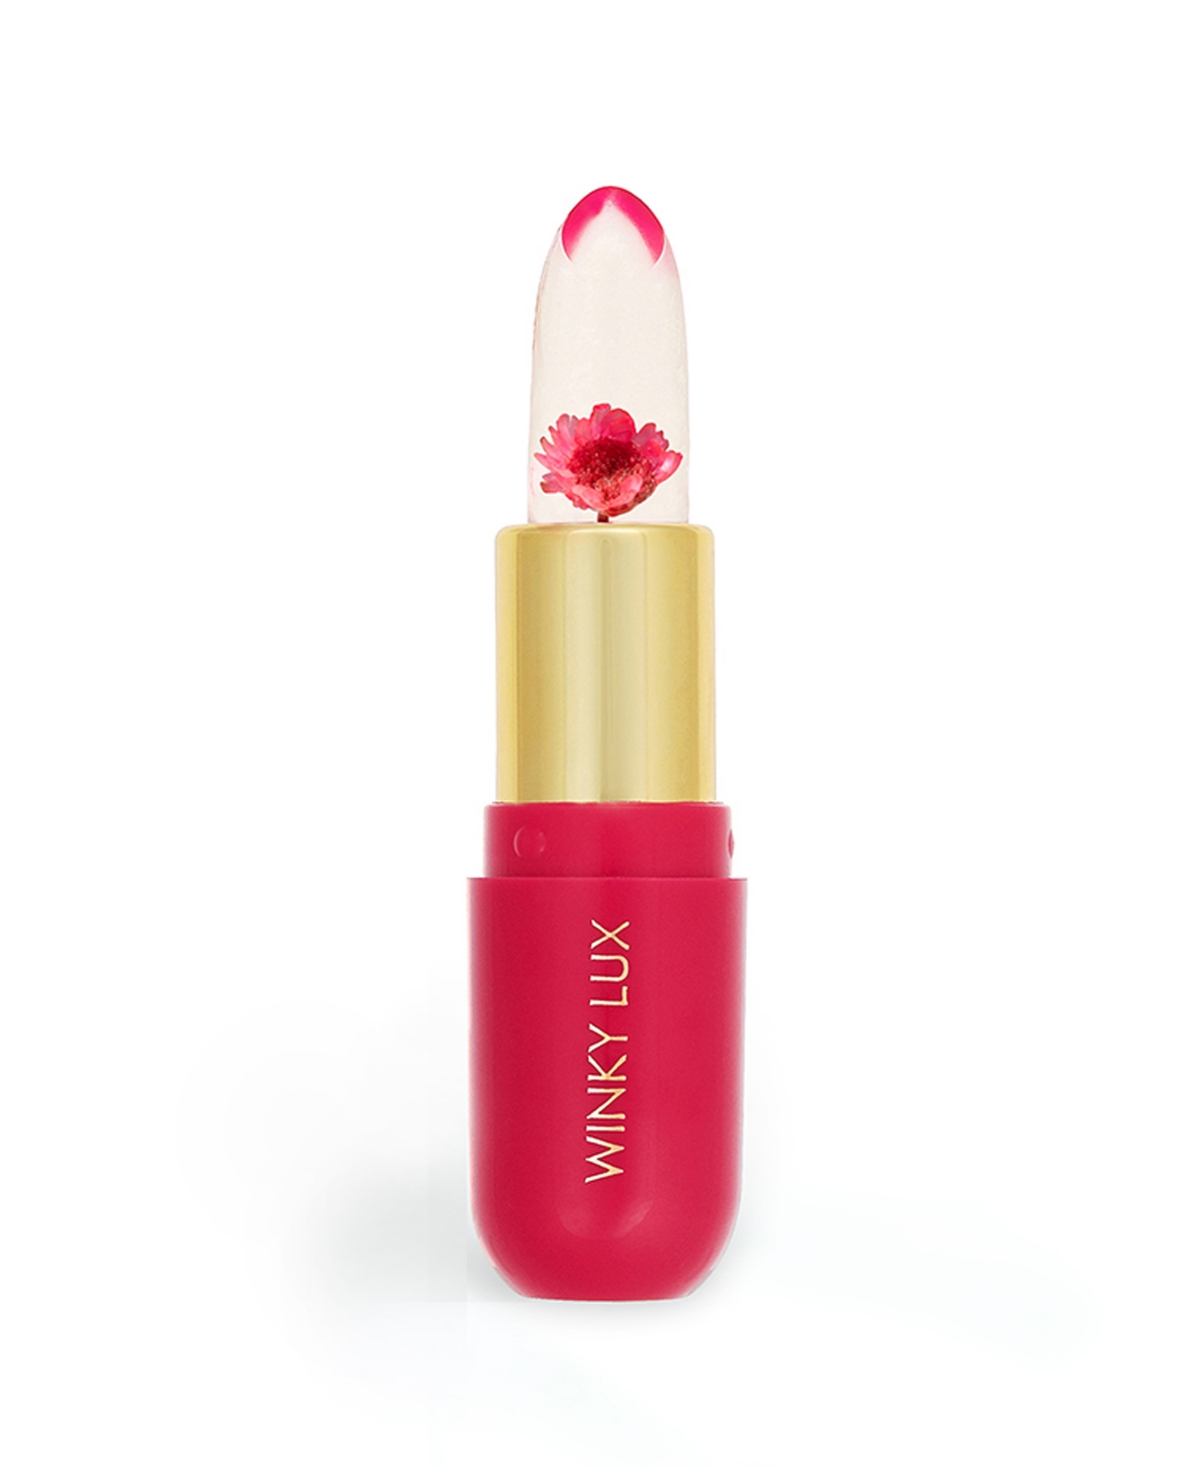 Winky Lux Flower Balm In Pink - Natural Pop Of Pink